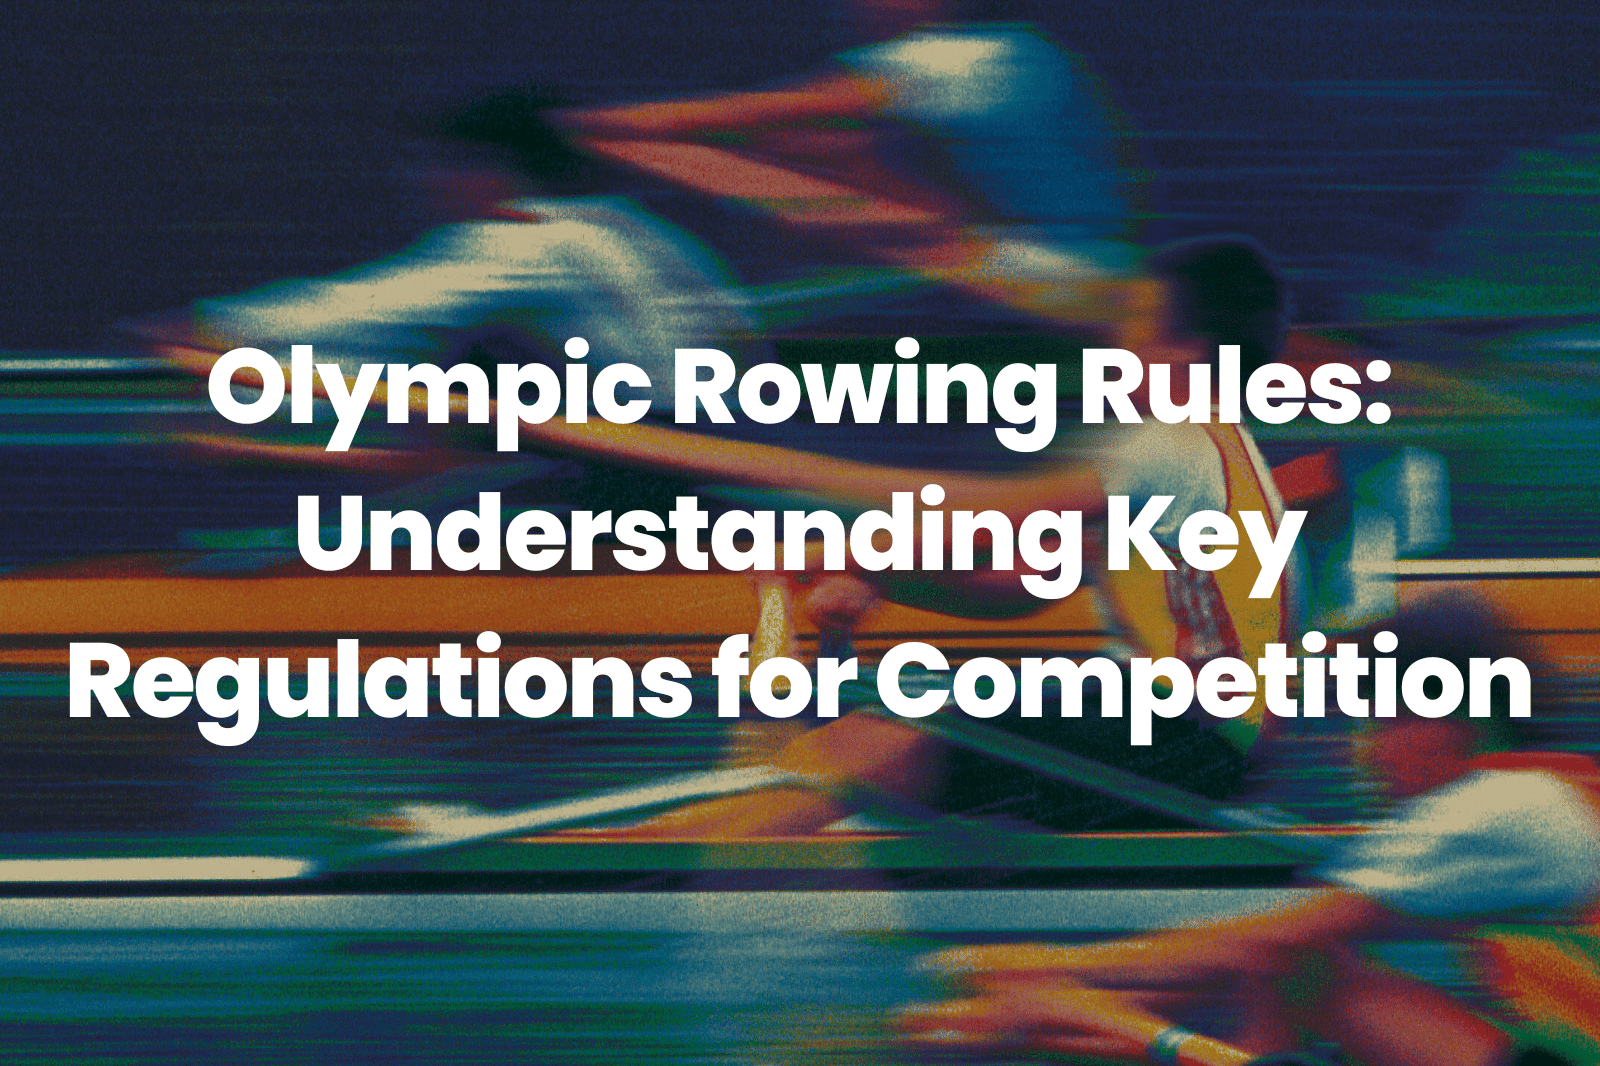 Olympic Rowing Rules: Understanding Key Regulations for Competition